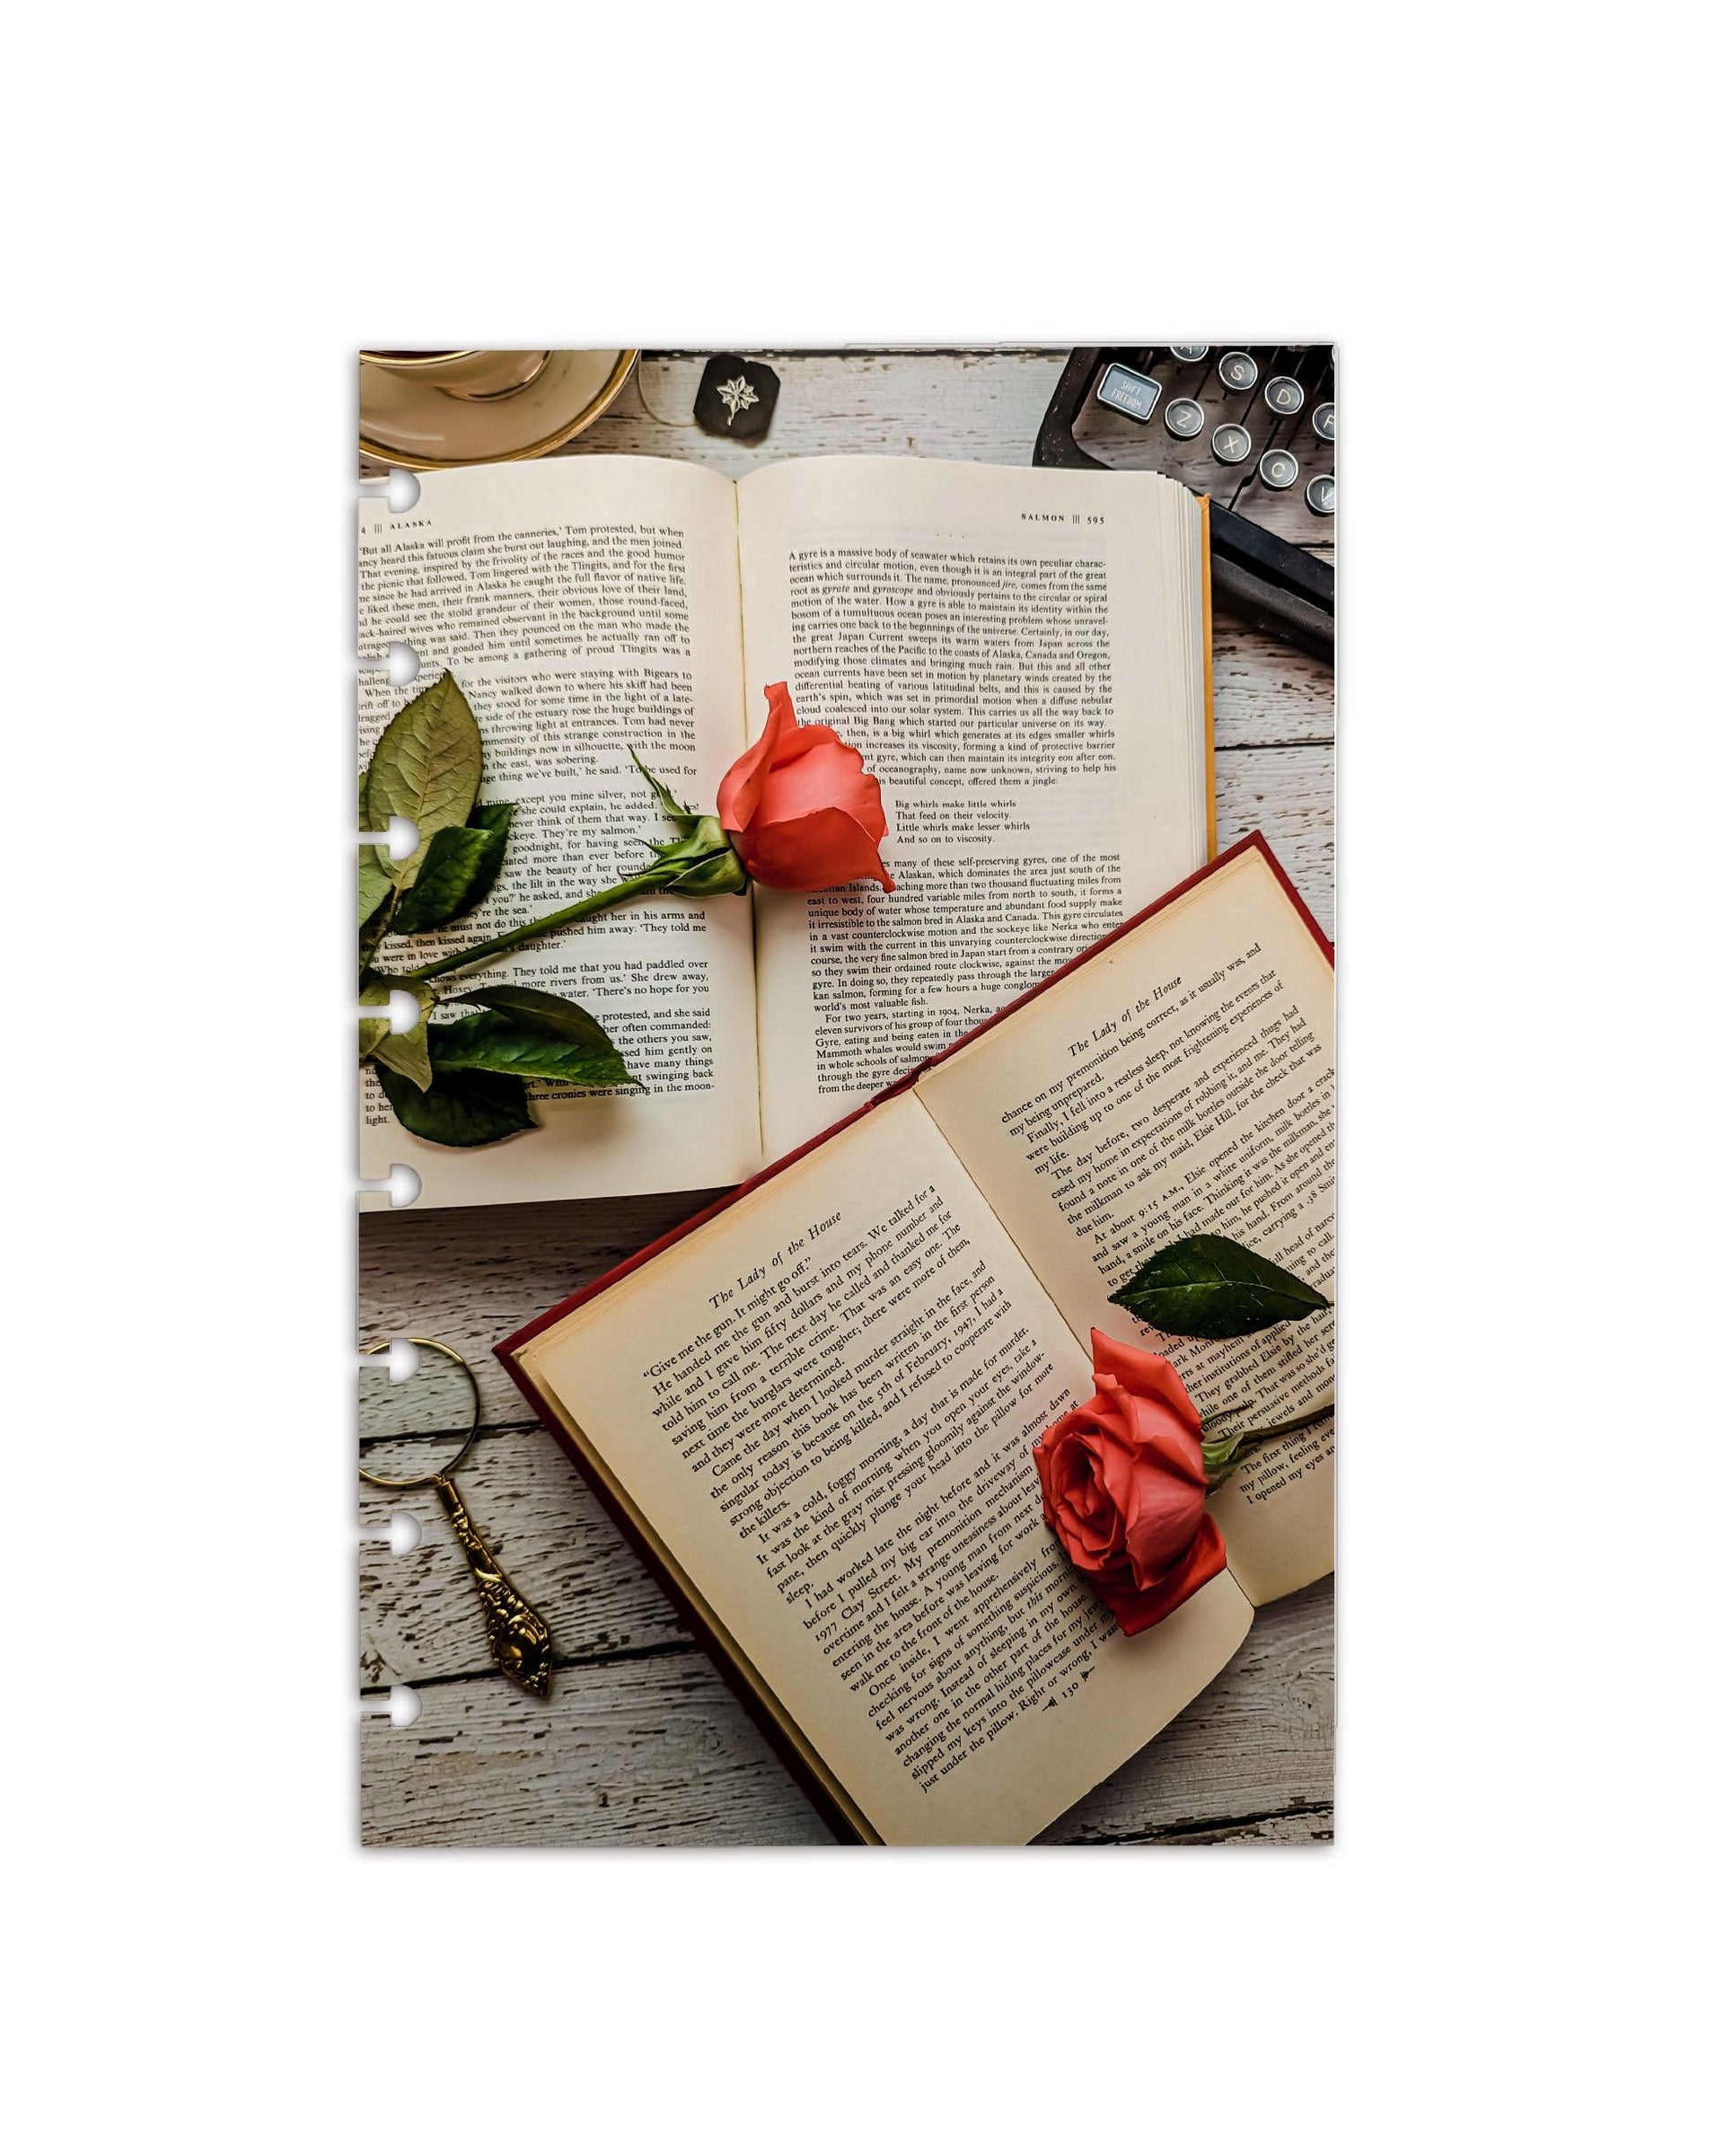 Books and roses printed on a cardstock dashboard for discbound planners, disc notebooks, and A5 size planner systems by Jane's Agenda.